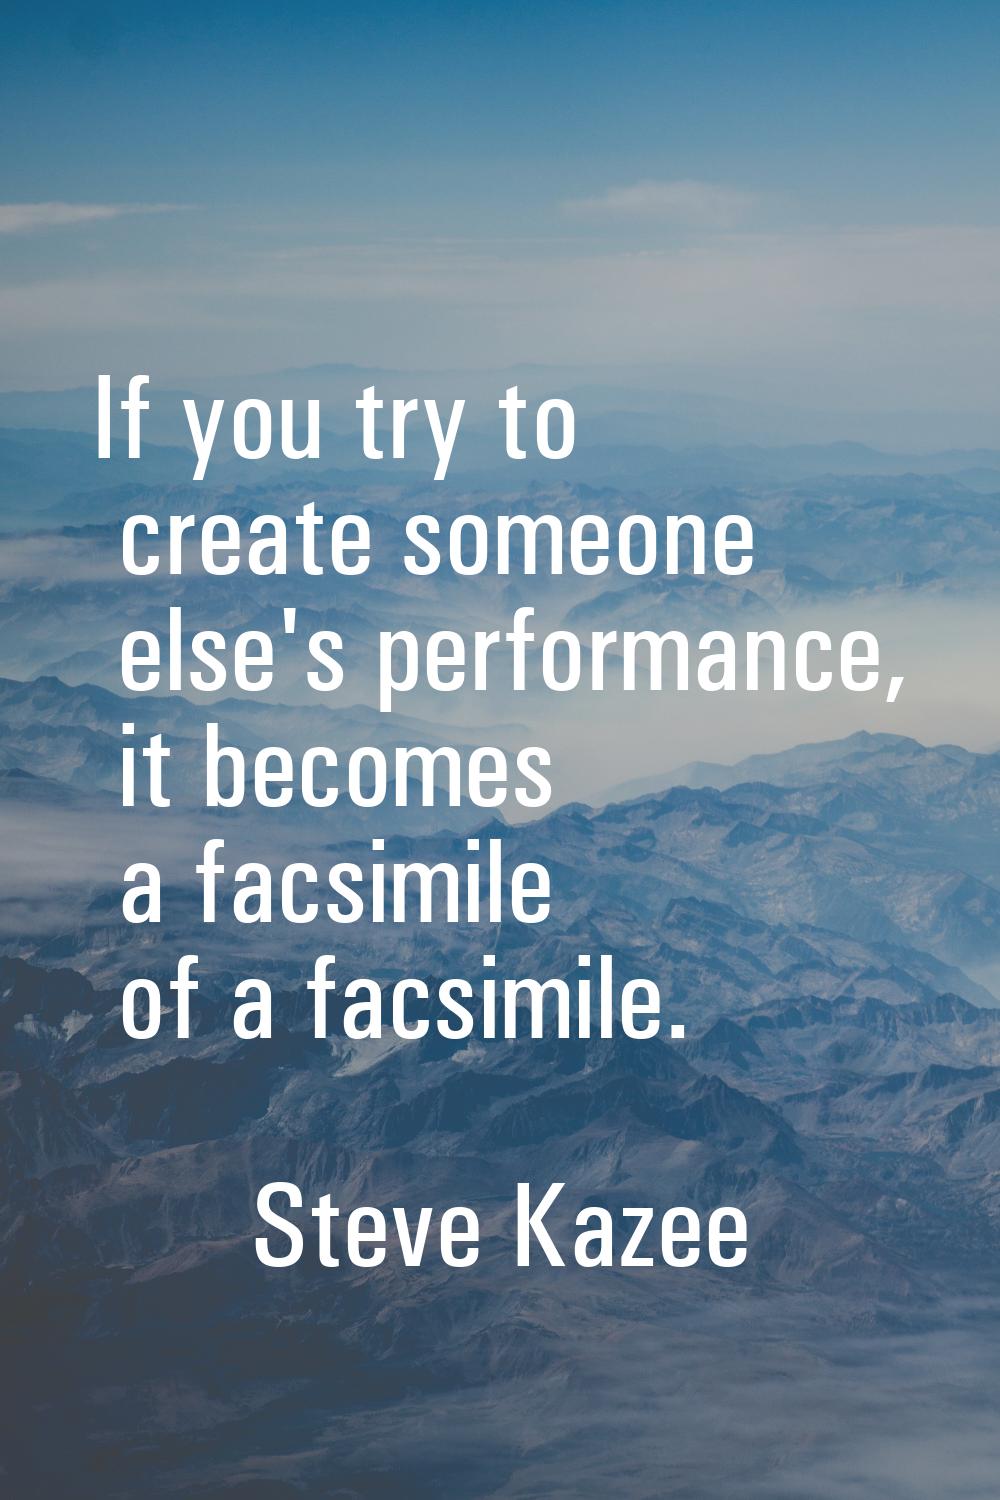 If you try to create someone else's performance, it becomes a facsimile of a facsimile.